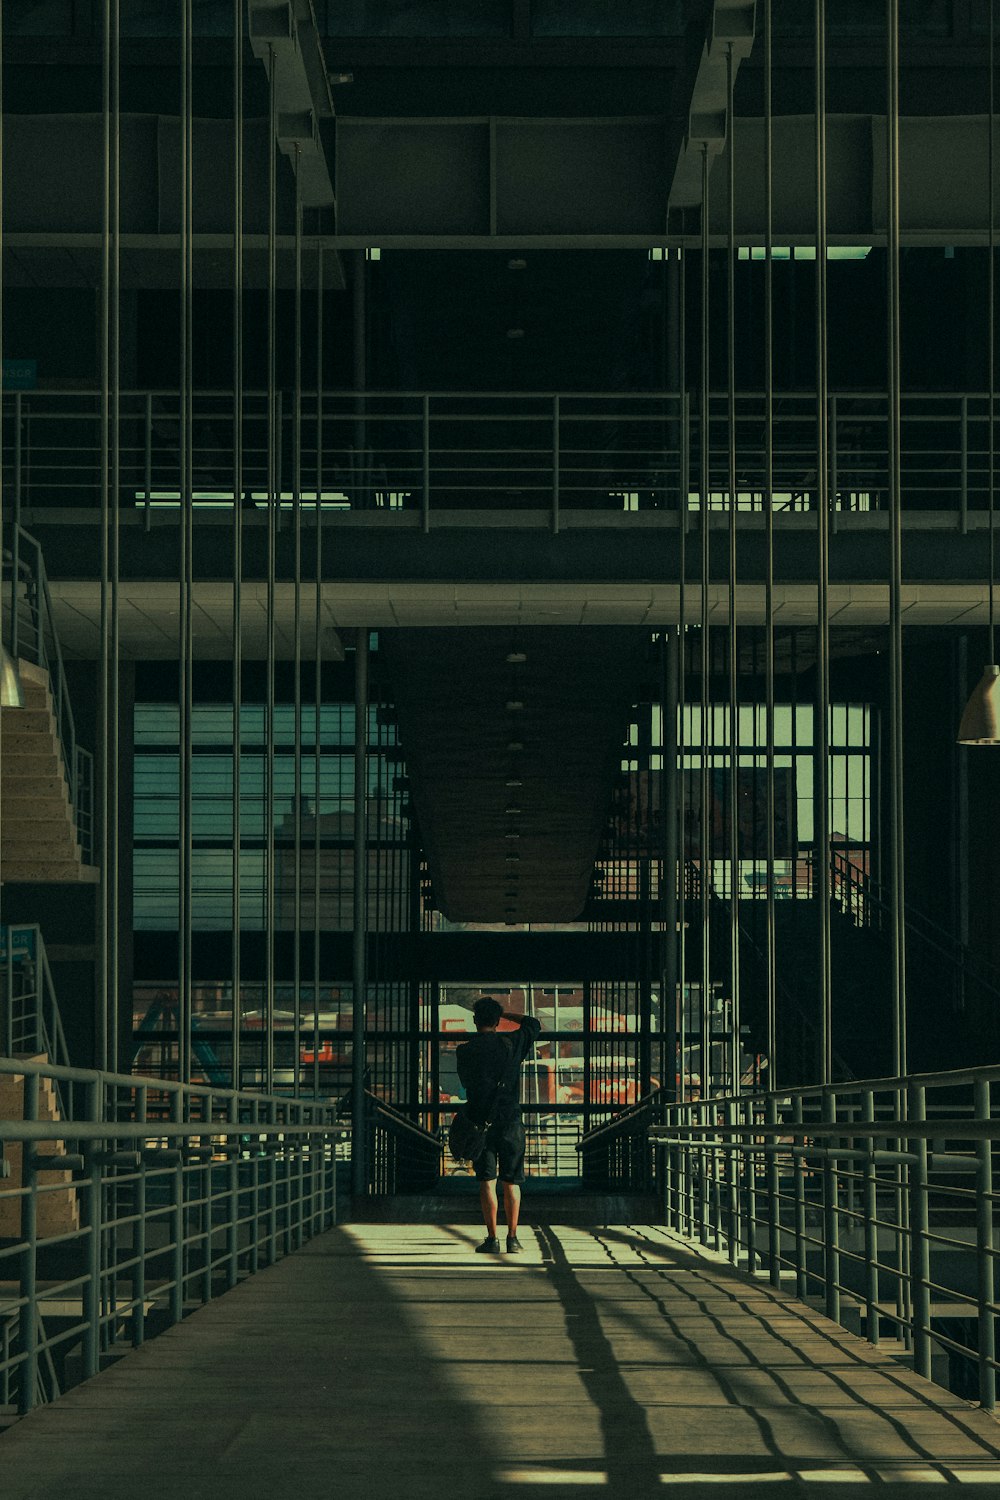 a person walking down a walkway in a building